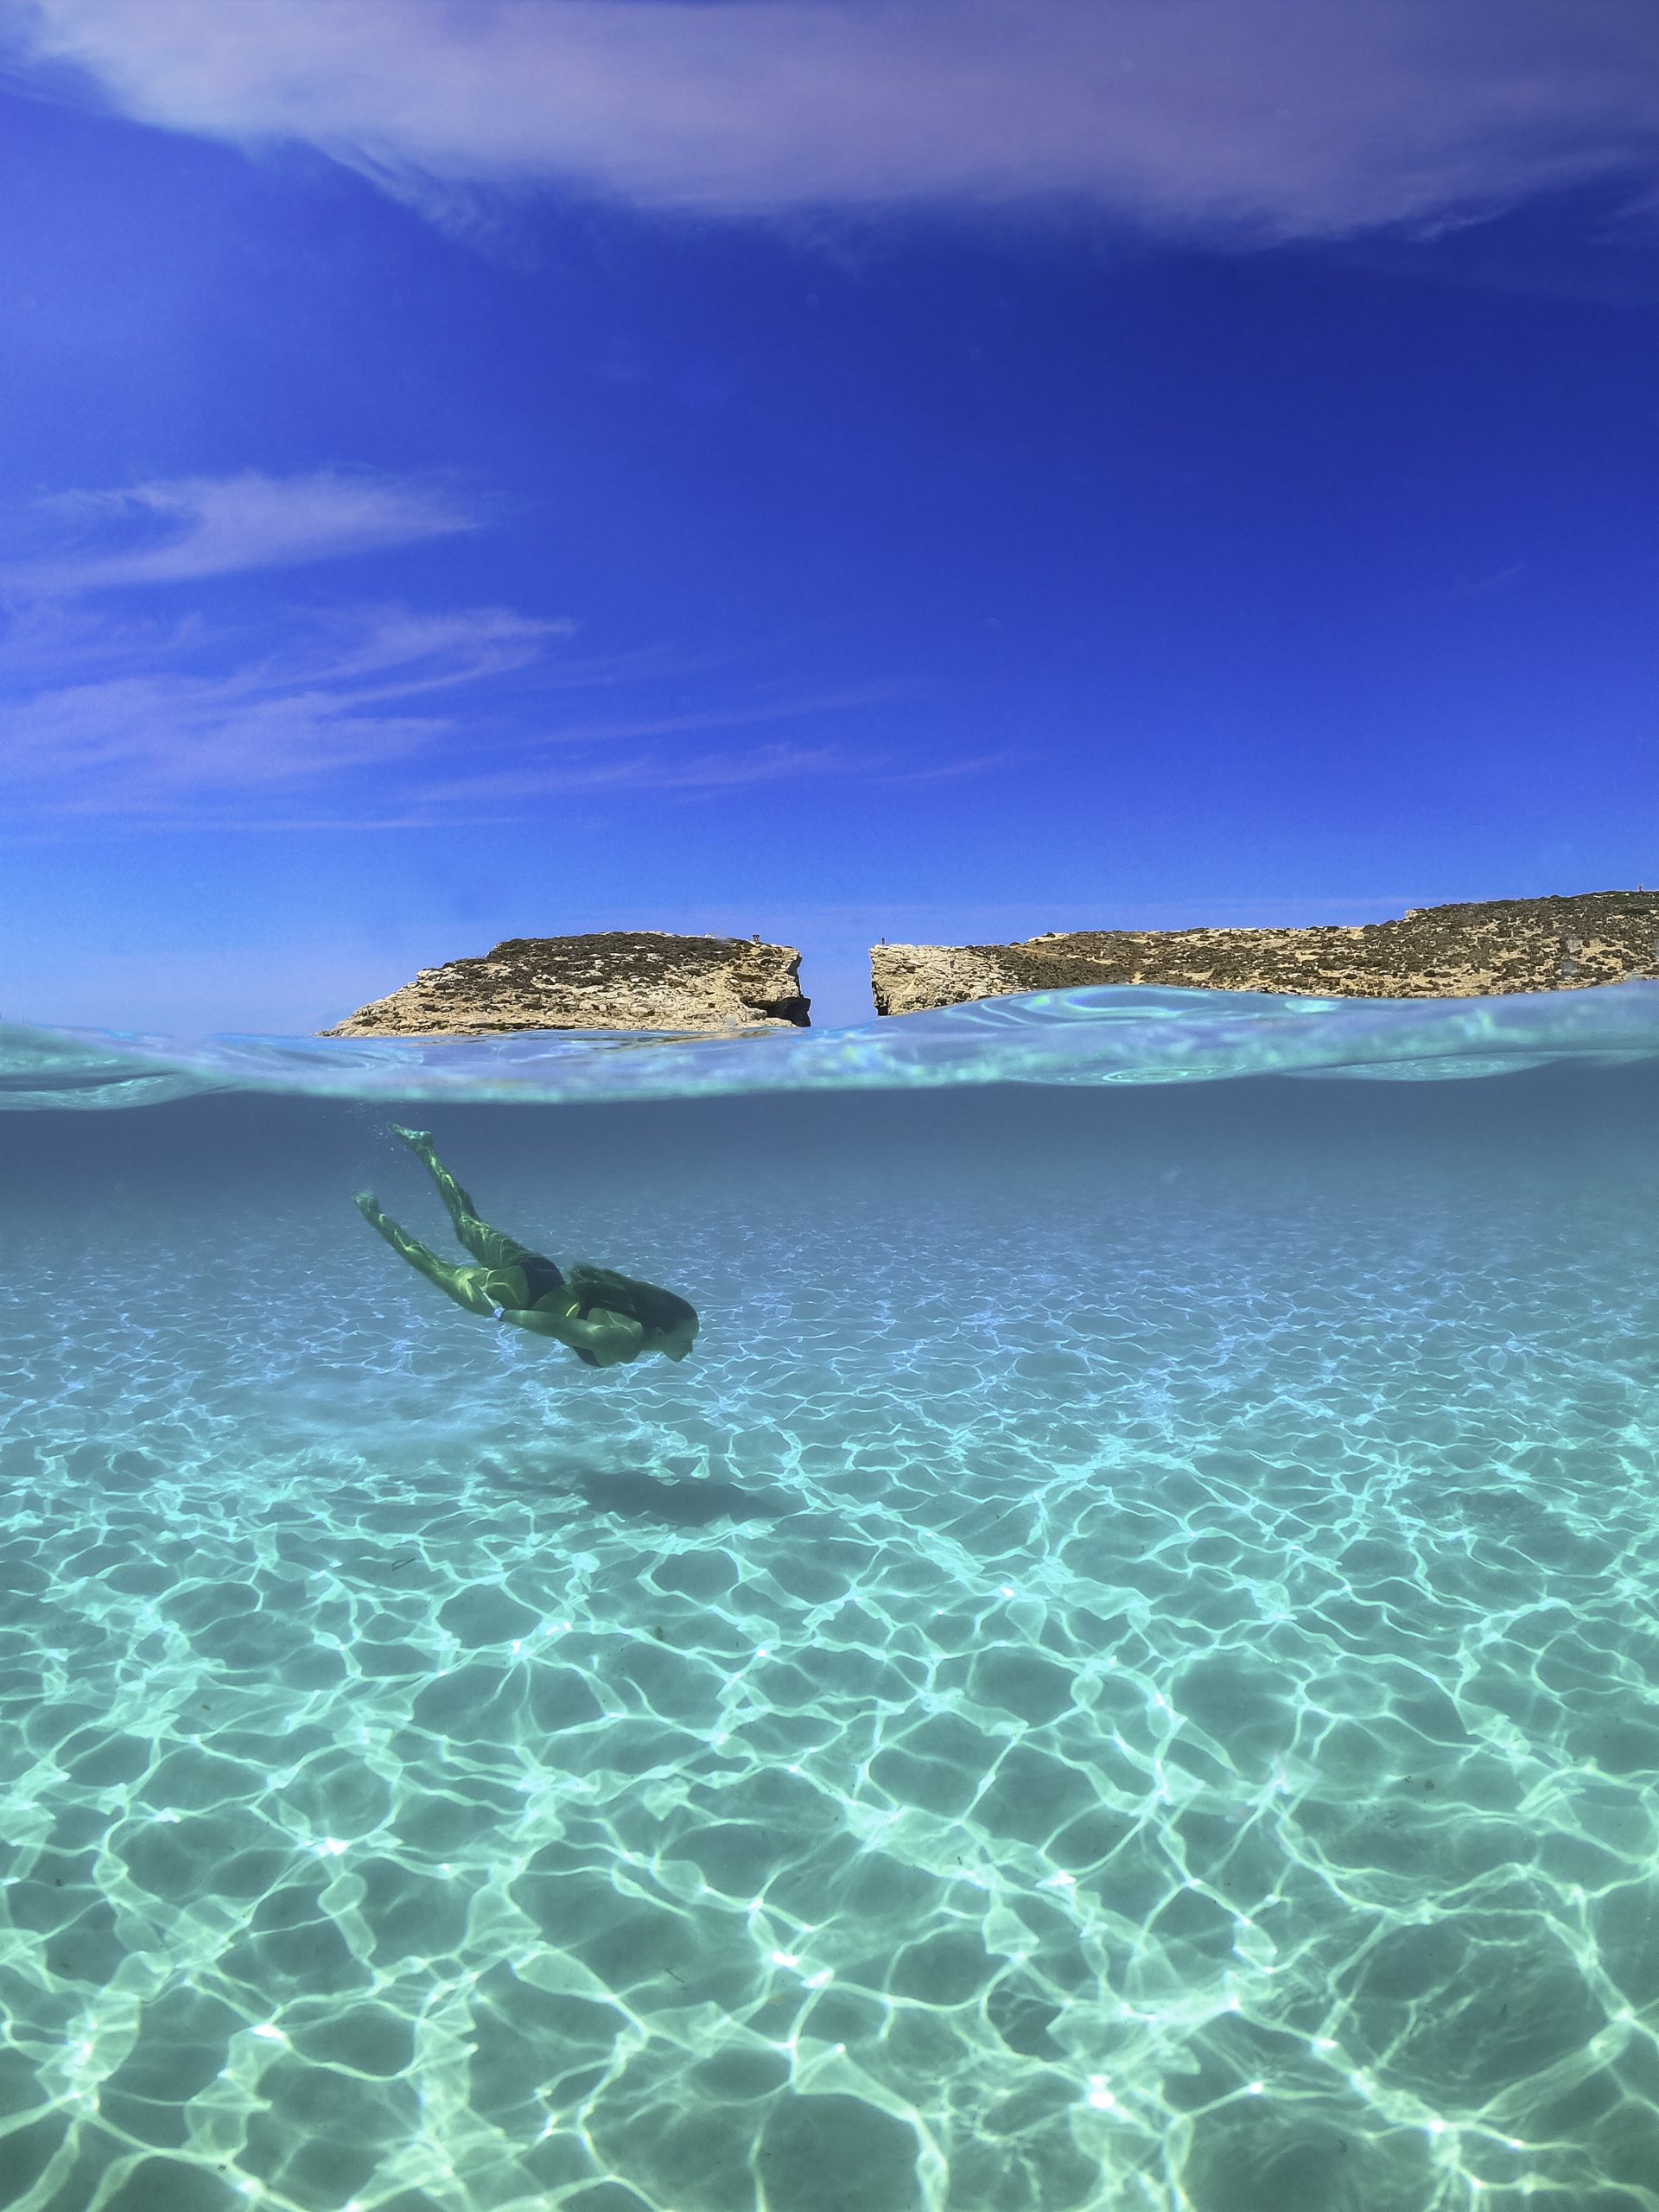 Gozo's mild temperatures make swimming a possibility from April till early November.